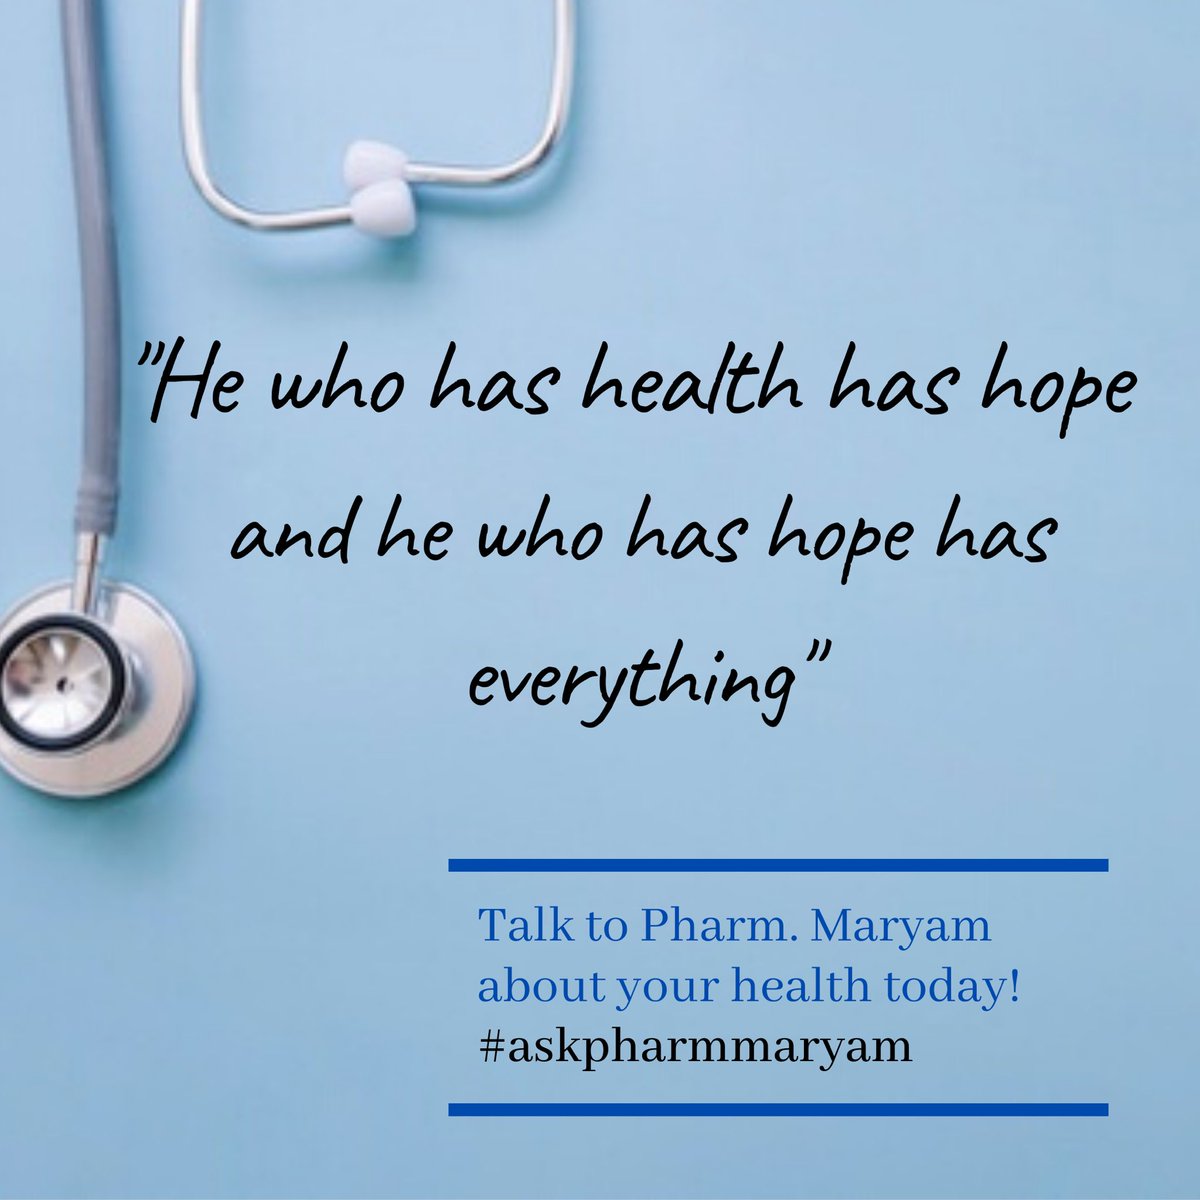 I am a certified, trained and licensed pharmacist. Talk to me about your health issues and concerns. #askpharmmaryam #pharmacist #pharmmaryam @MeCureHealth @WHO #HealthForAll #WorldHealthOrganization #healthylifestyle #onlinepharmacist #healthcareinafrica #nigerianpharmacist